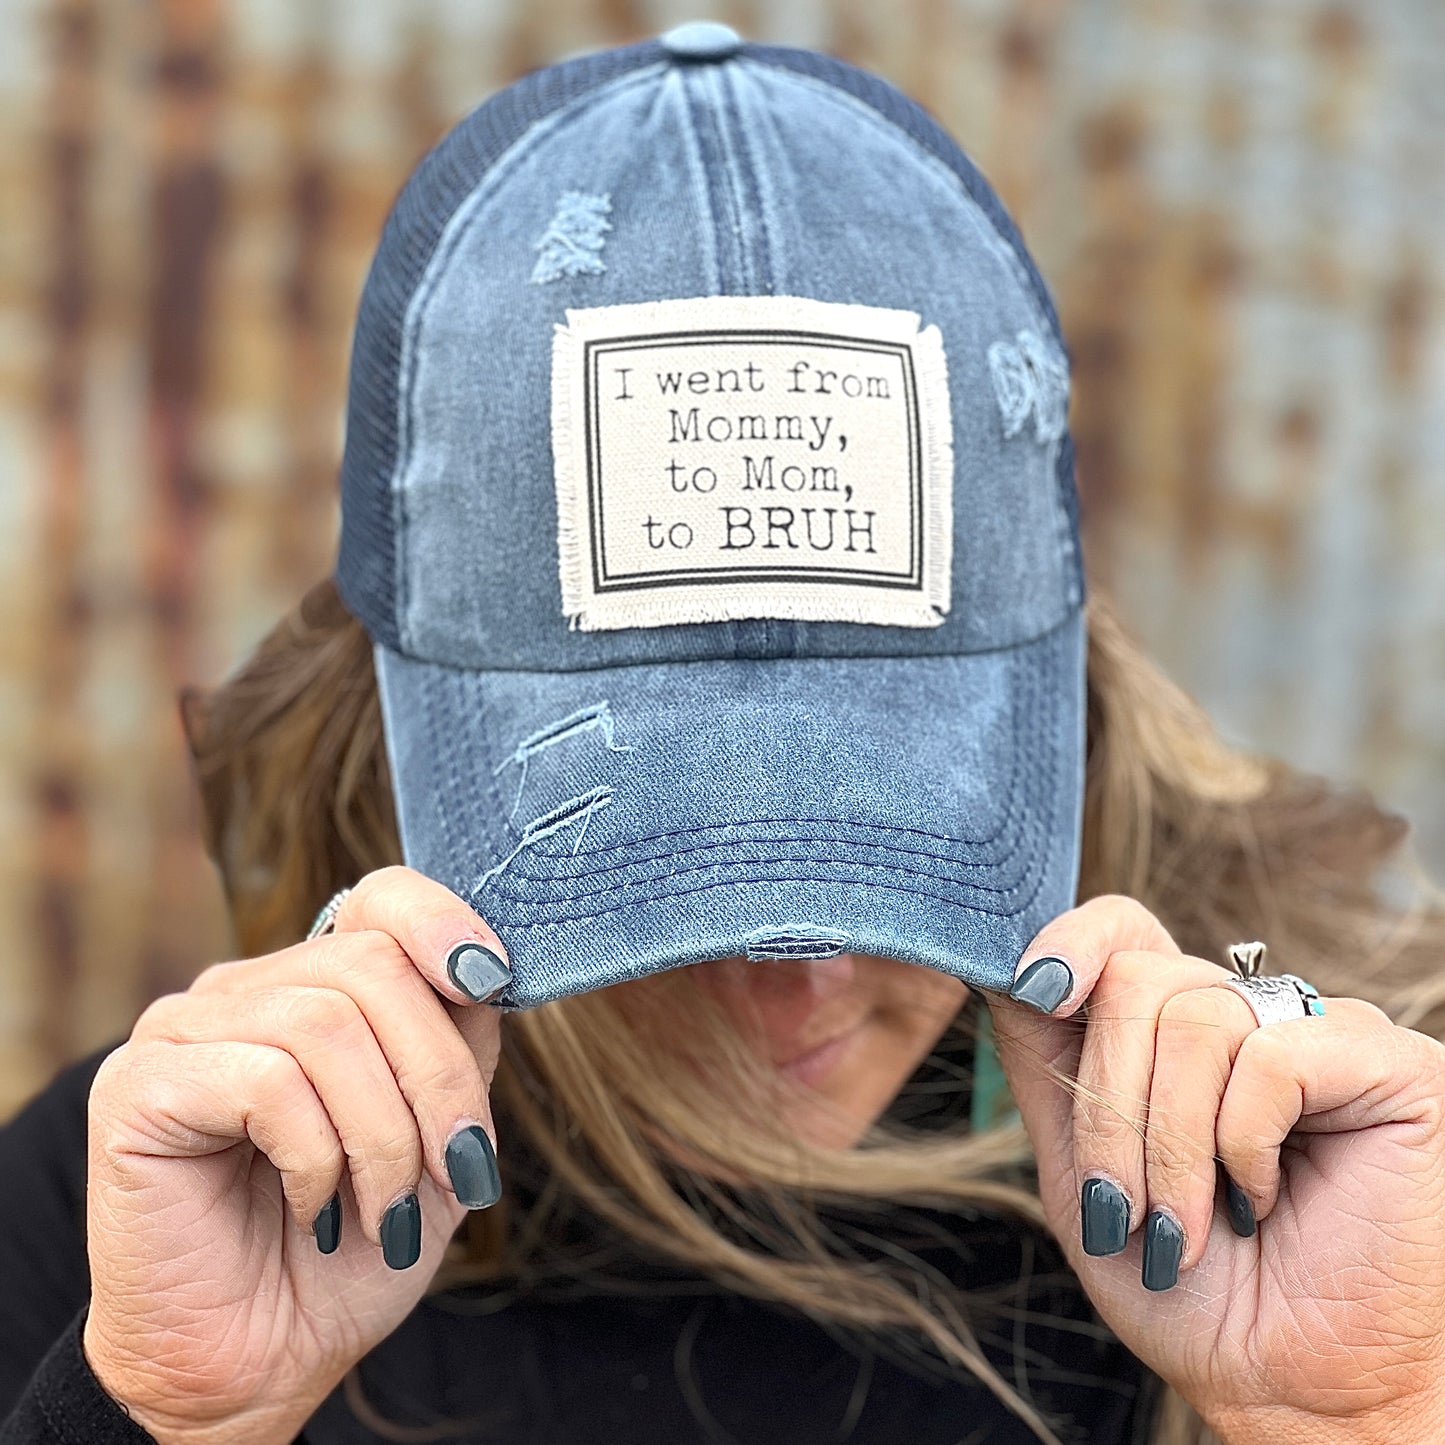 Distressed Navy baseball cap with material patch saying" I went from Mommy, to Mom, to Bruh